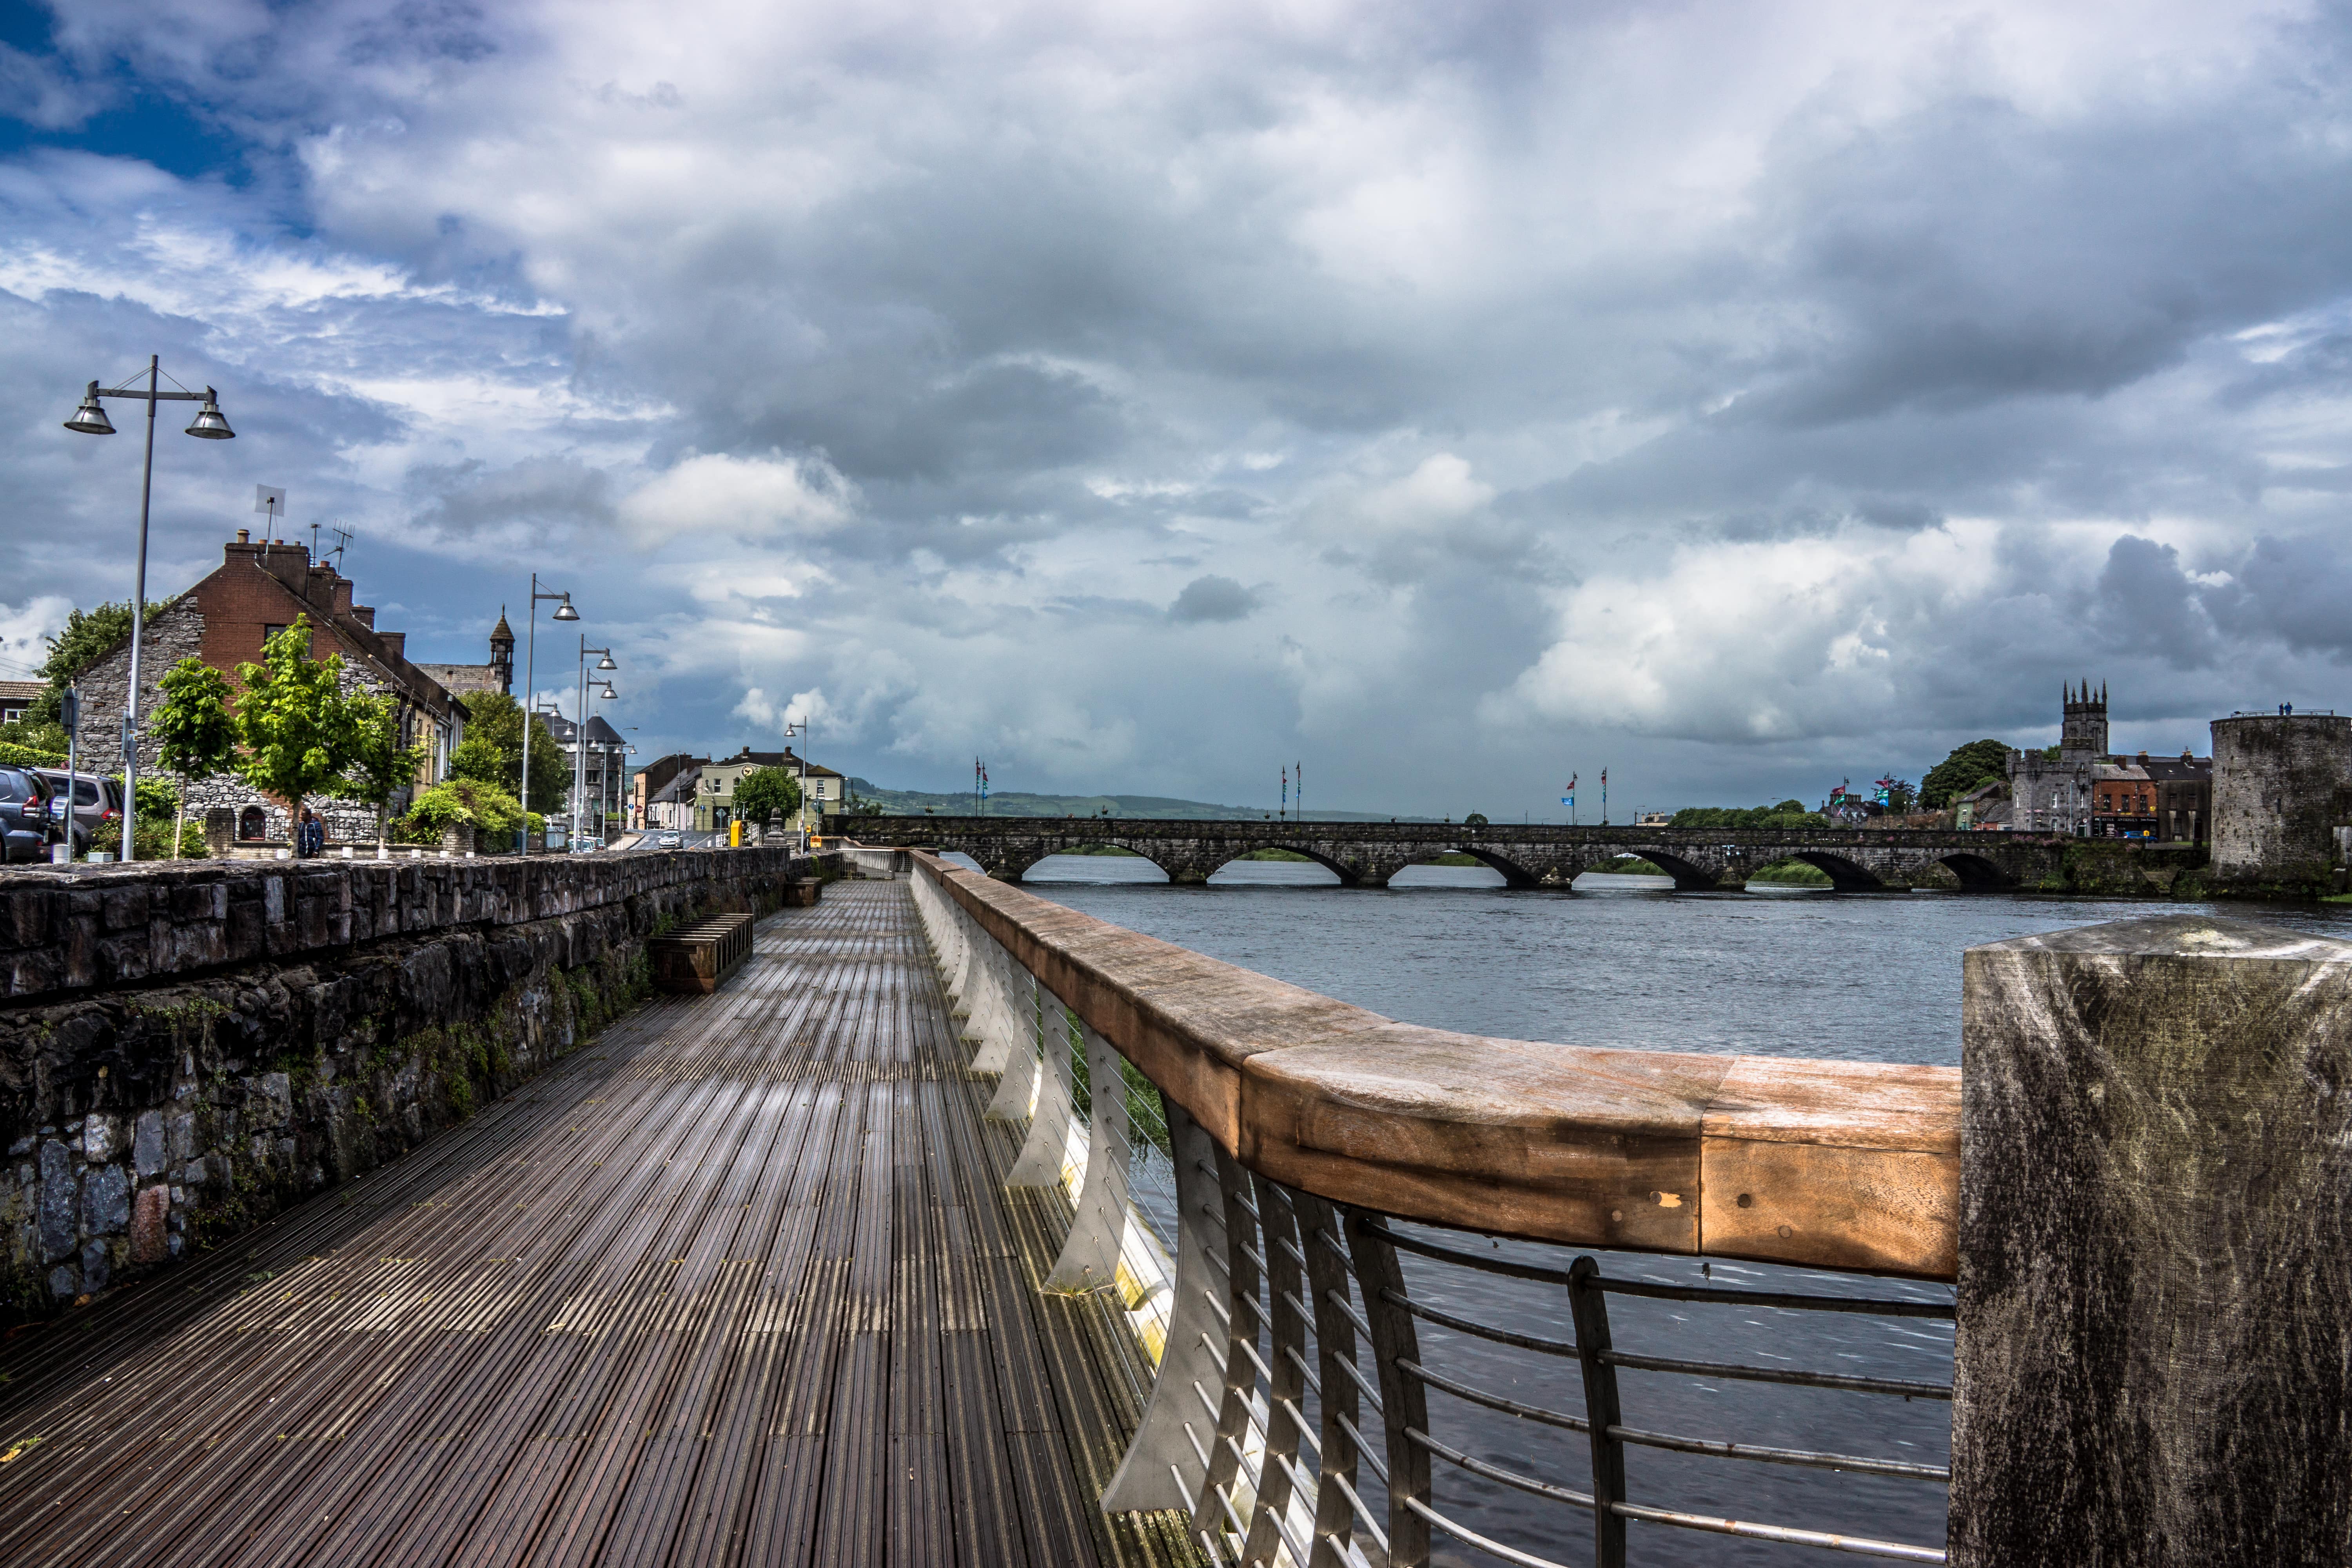 Limerick is a lovely place to visit in Ireland